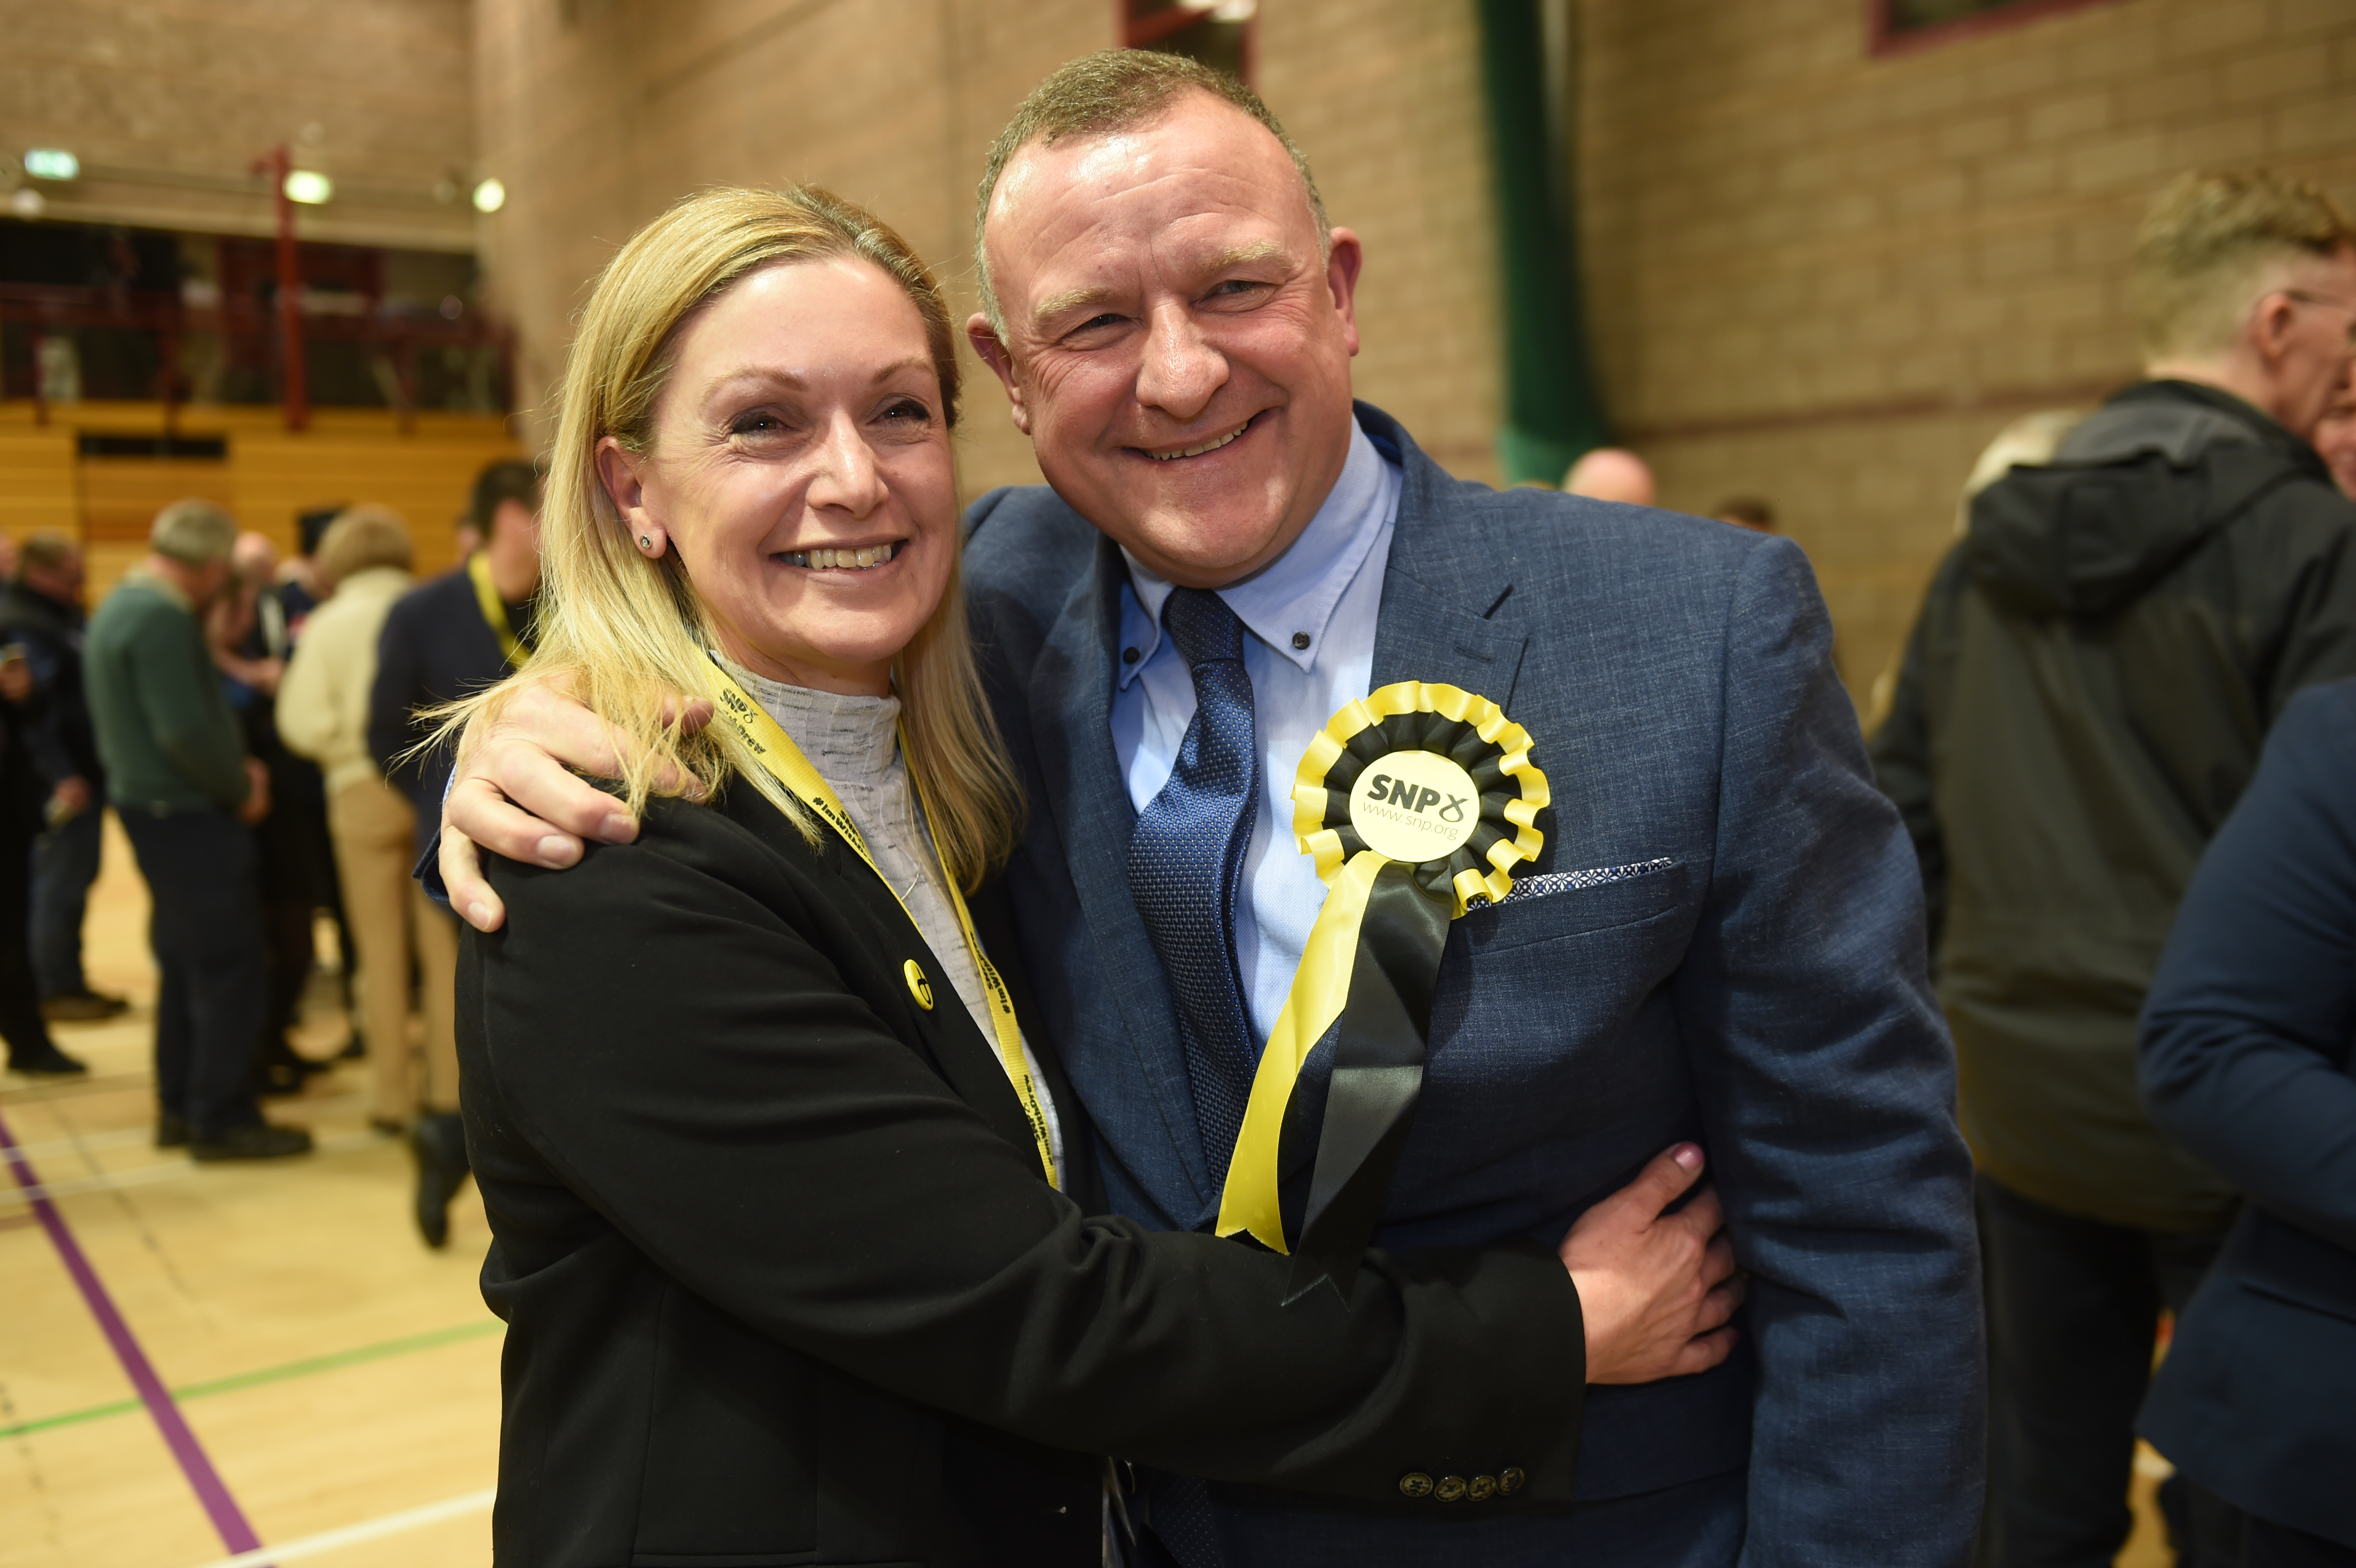 SNP’s Drew Hendry celebrates being re-elected for the Nairn, Badenoch and Strathspey seat at Inverness Sports Centre. Picture by Sandy McCook